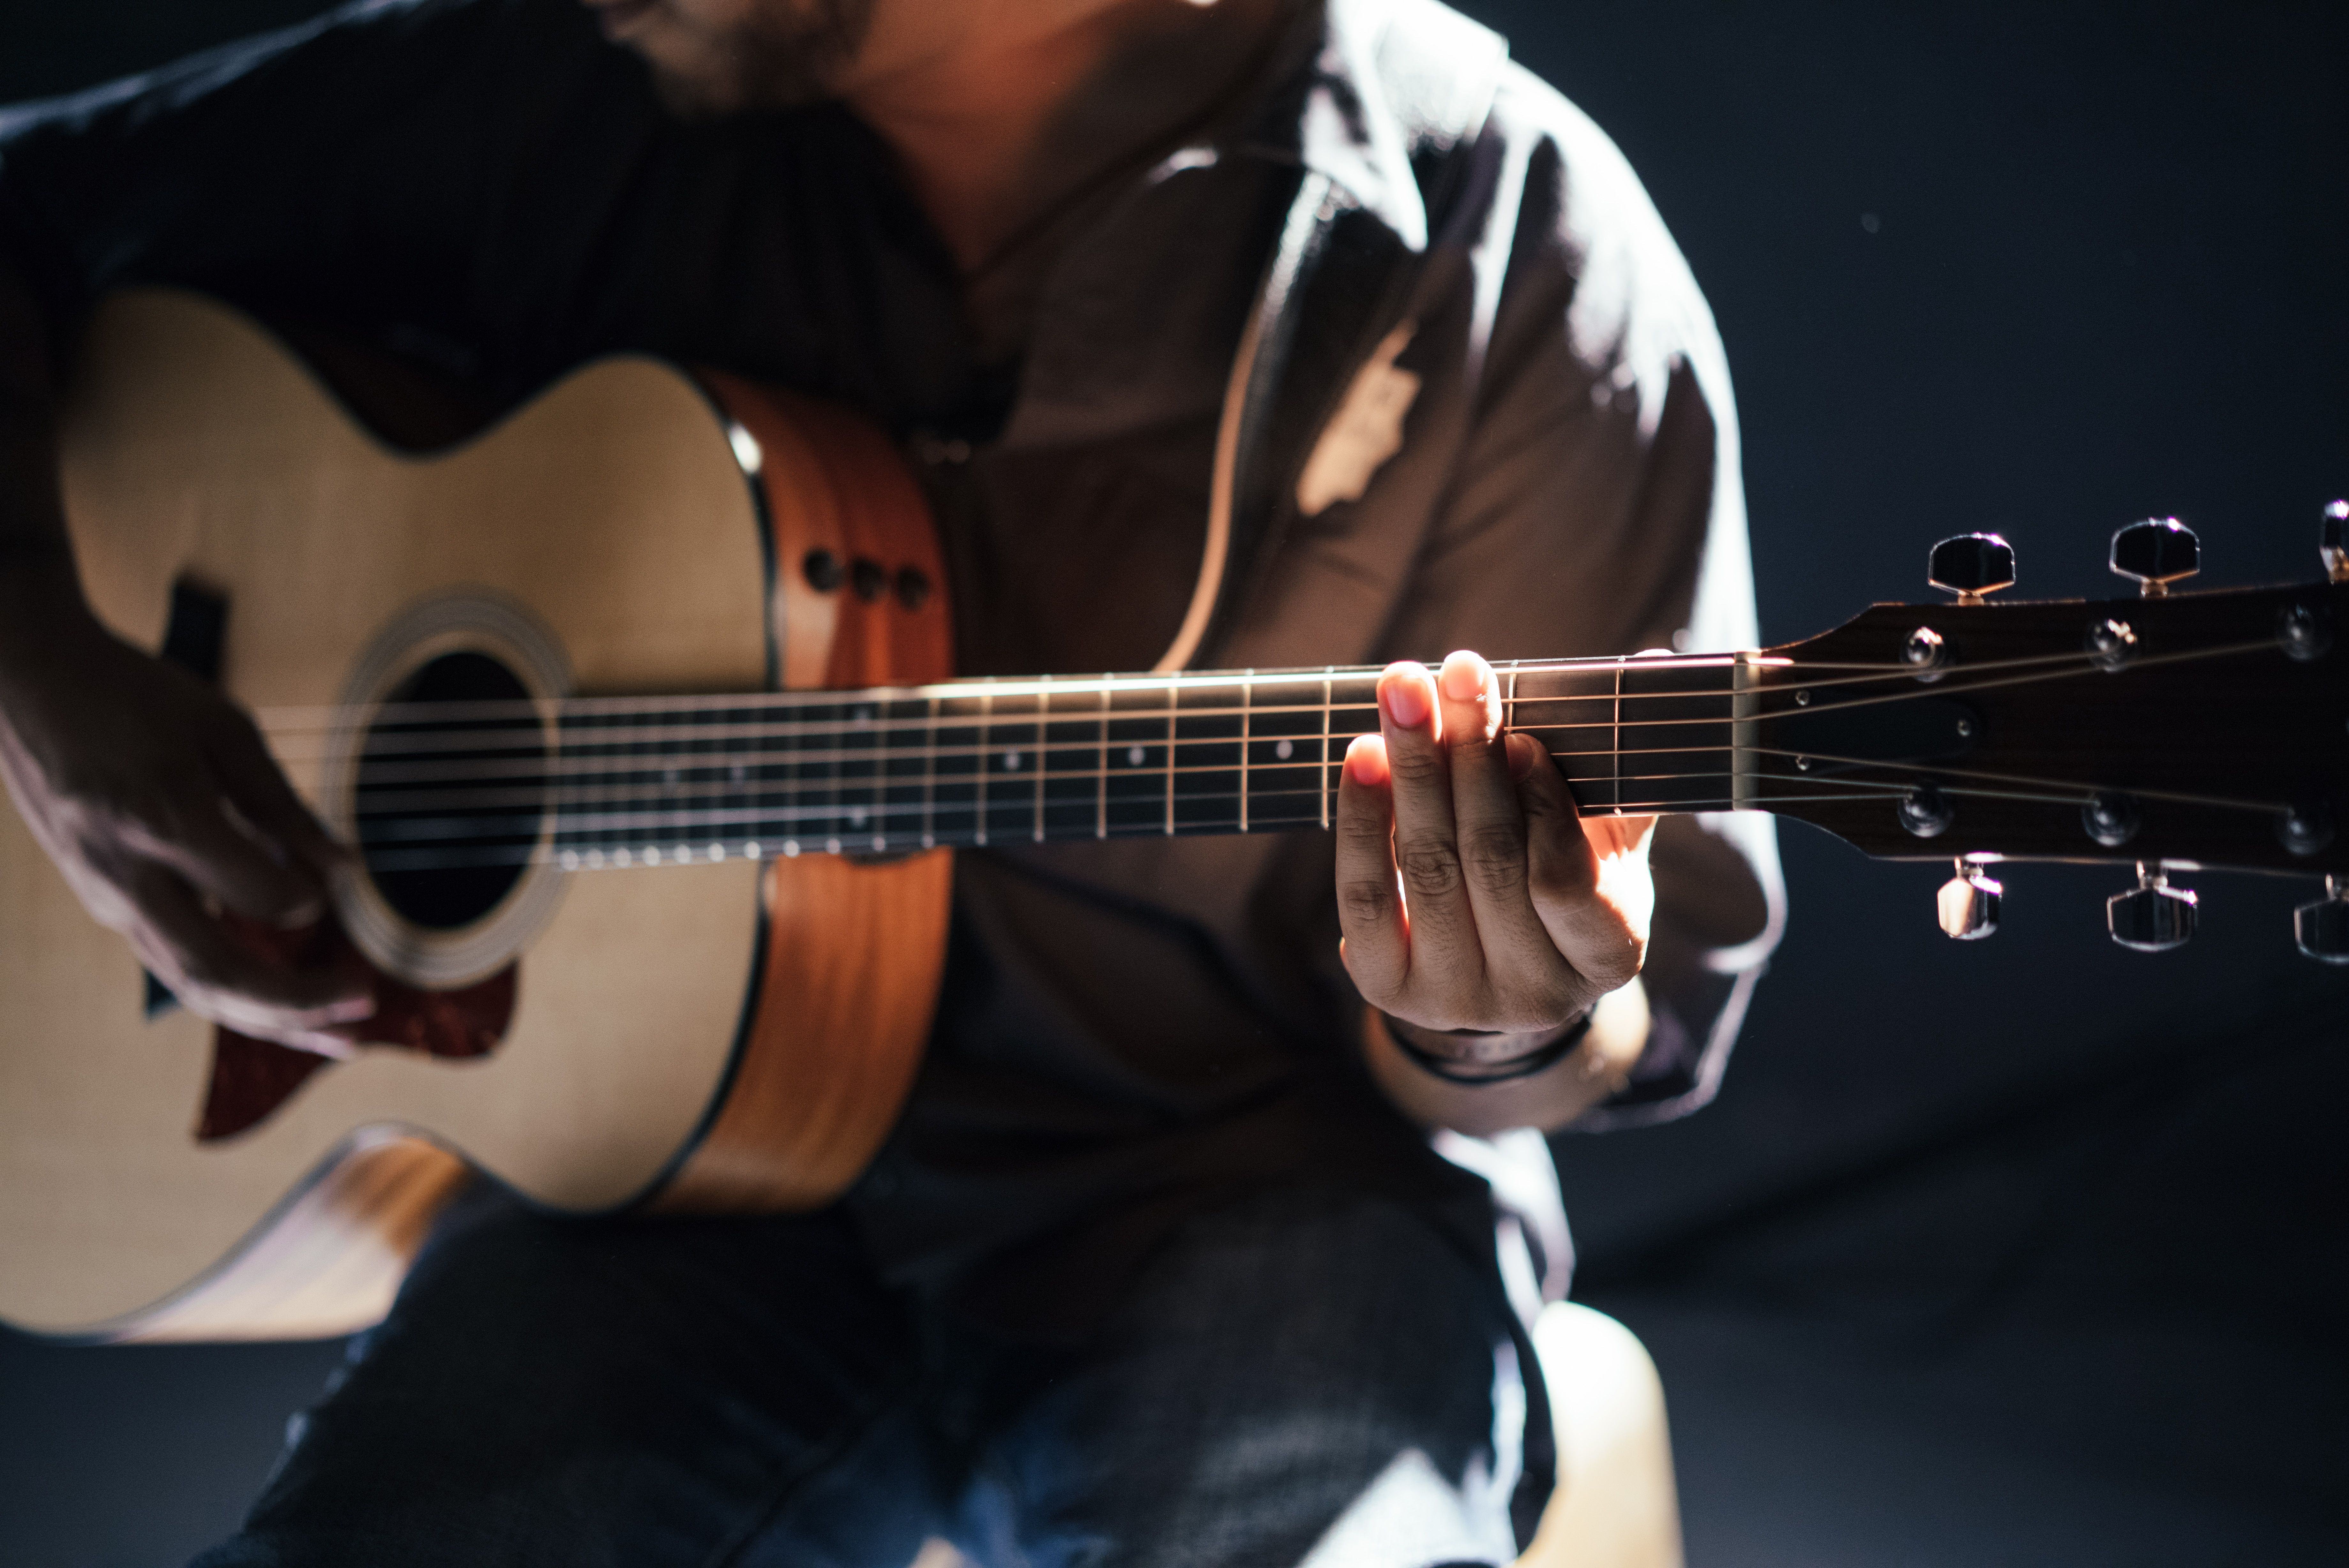 Hands on strings of an acoustic guitar 